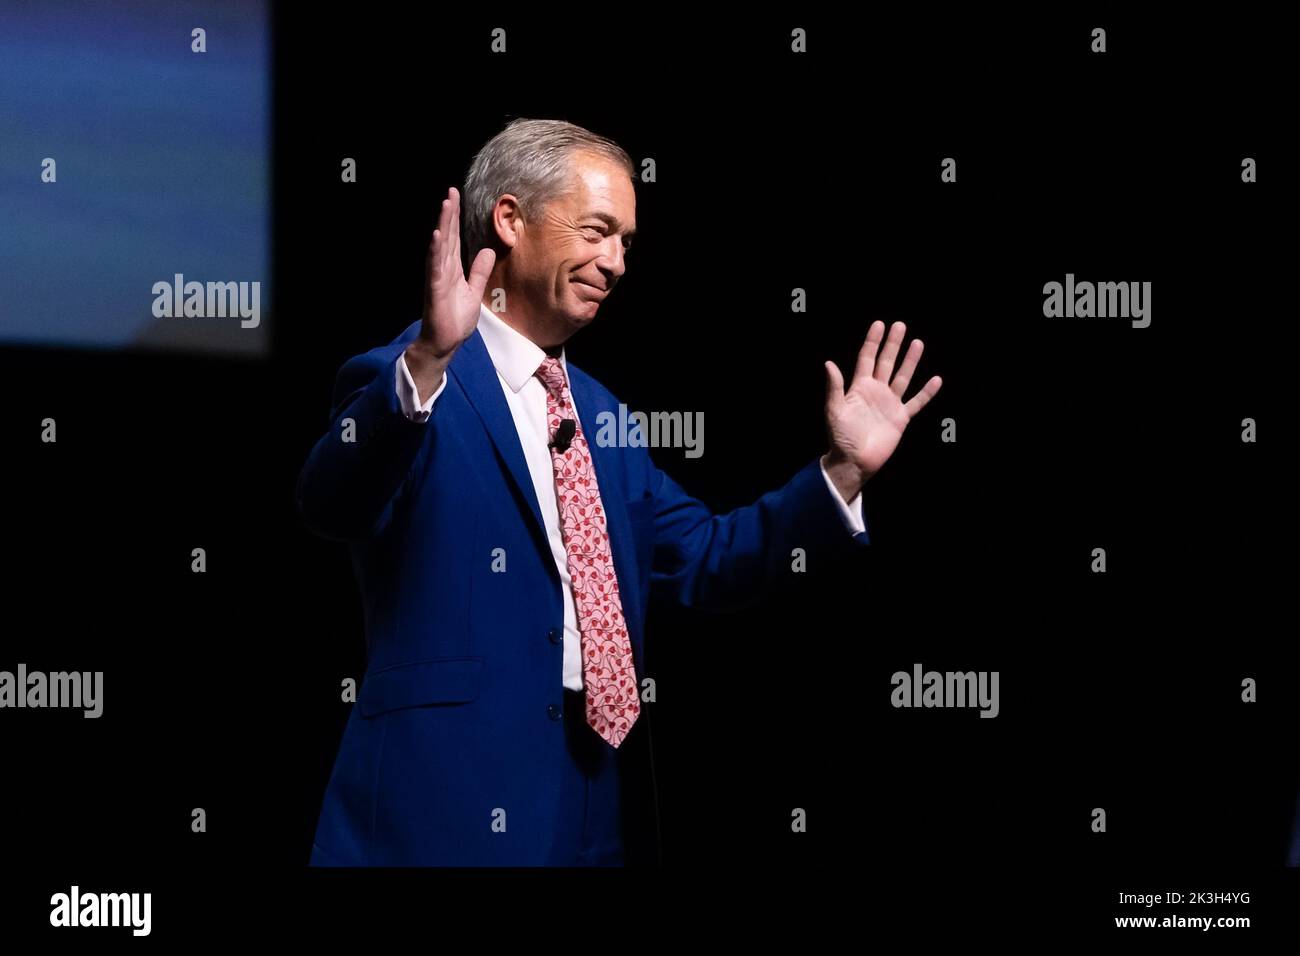 Melbourne, Australia, 26 September, 2022. Nigel Farage thanks his audience after speaking during An Evening With Nigel Farage at The Melbourne Convention and Exhibition Centre on September 26, 2022 in Melbourne, Australia. Credit: Dave Hewison/Speed Media/Alamy Live News Stock Photo